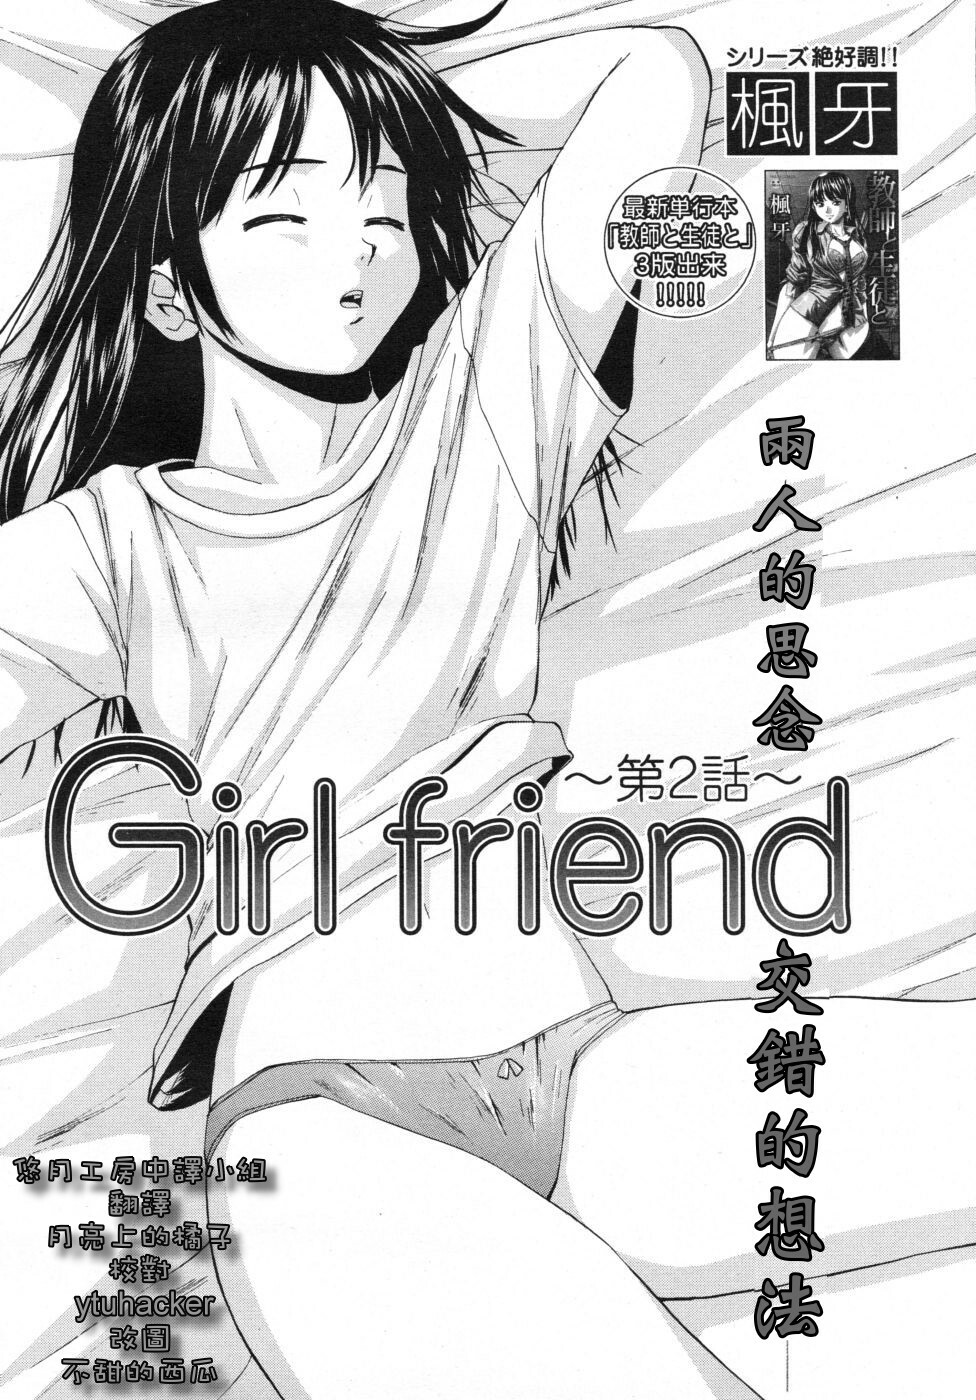 [Fuuga] Girl Friend 2 (Chinese) page 4 full